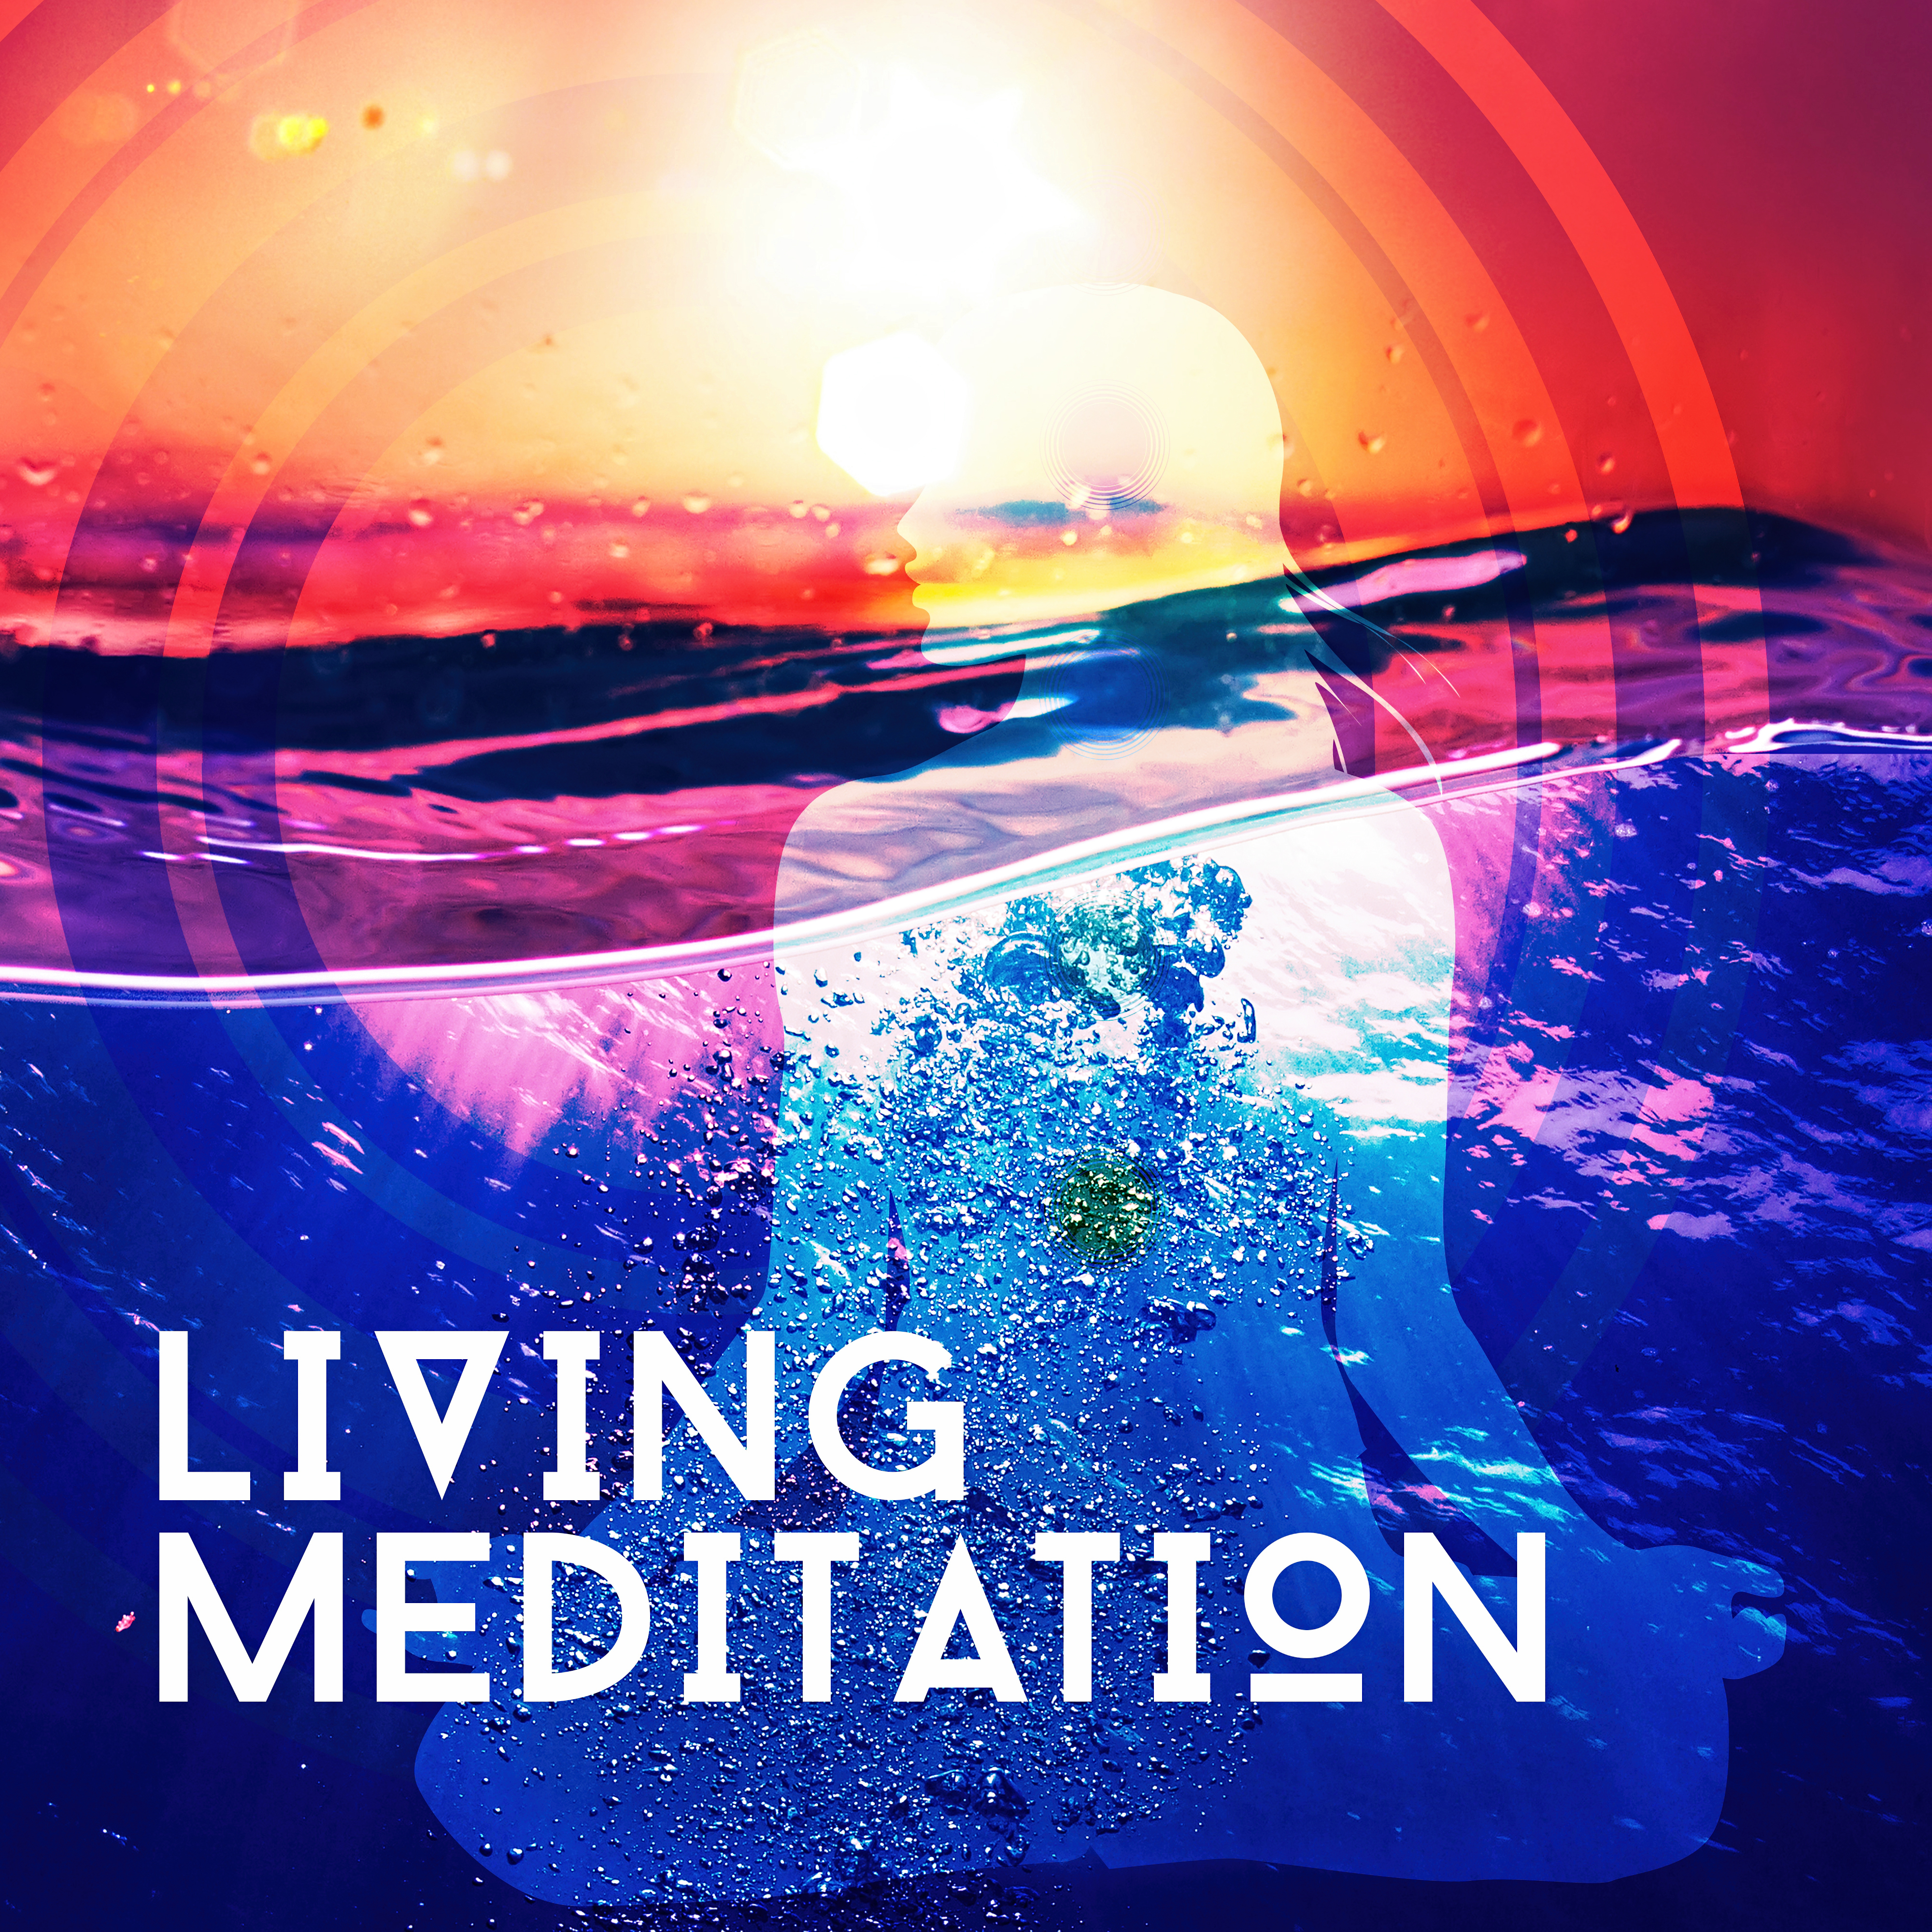 Living Meditation  New Age Music for Deep Relaxation, Stress Free  Ultimate Well Being, Totally Chilling, Yoga, Chakra Balancing, Mind Body Connection, Healing Songs